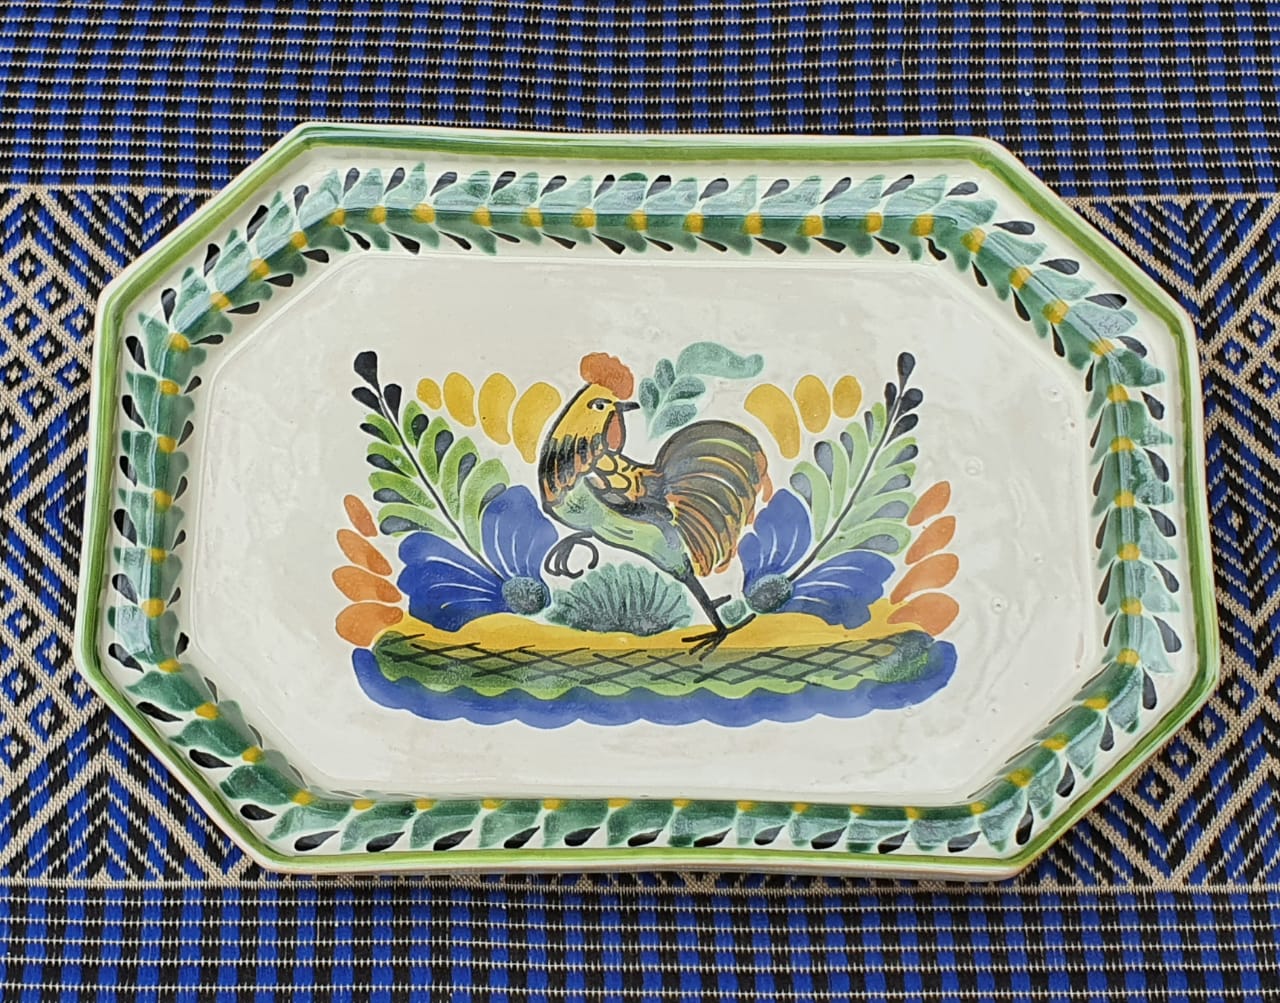 Rooster Small Octagonal Tray Green-Terracota Colors